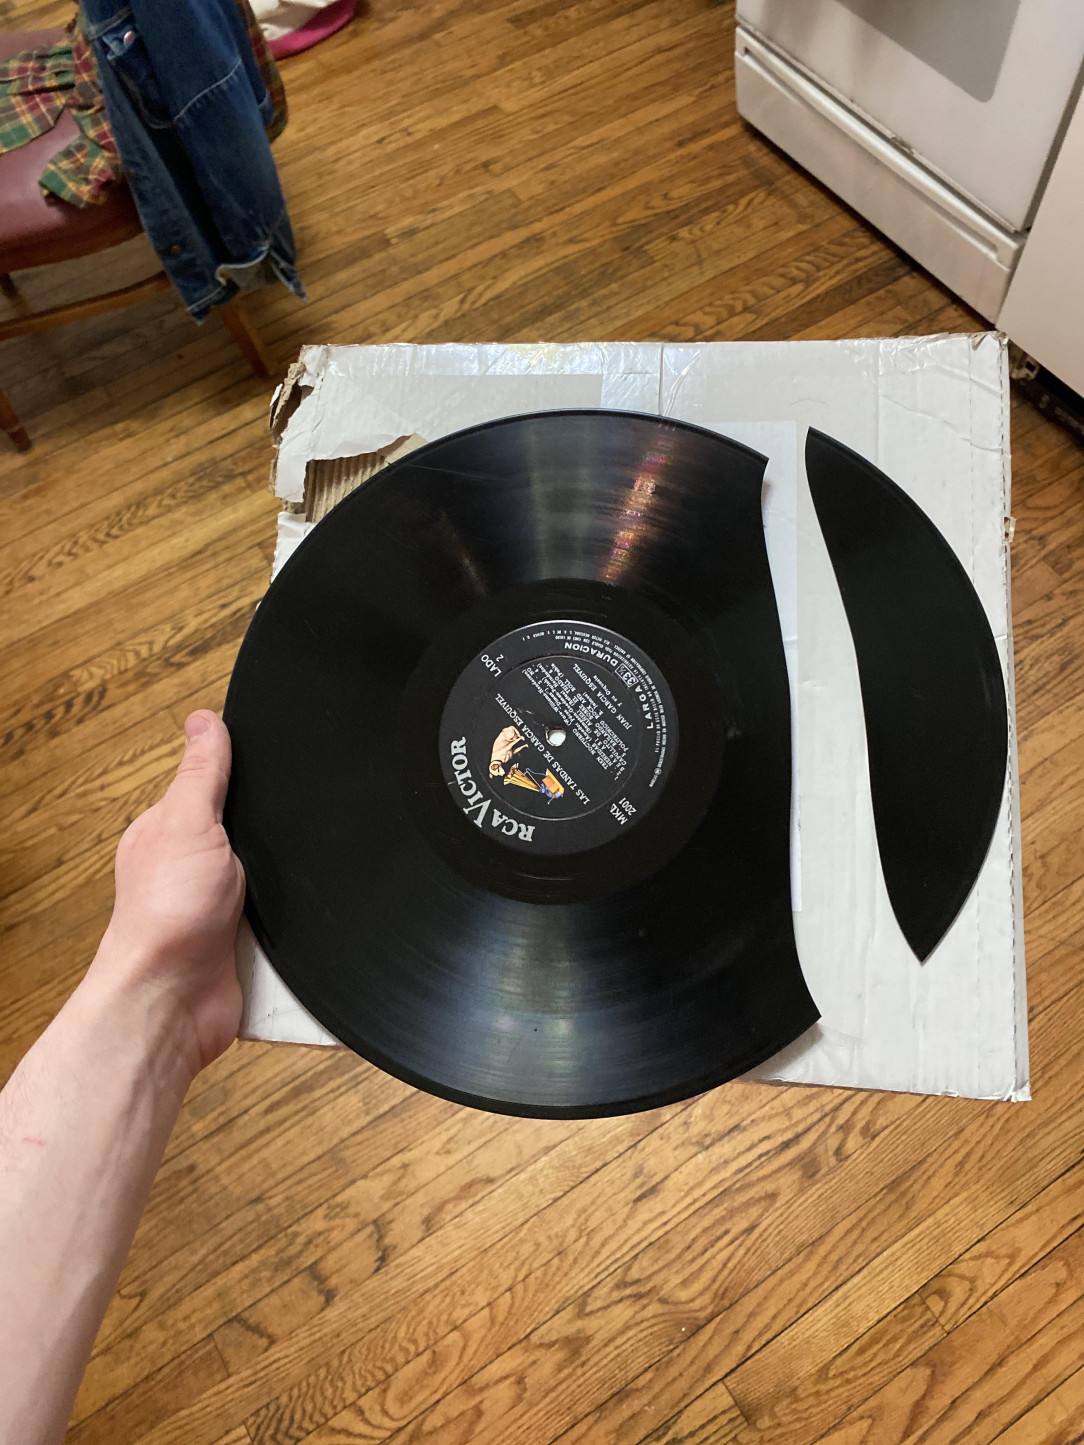 Won a rare record auction on eBay, this is how it arrived and without a cover